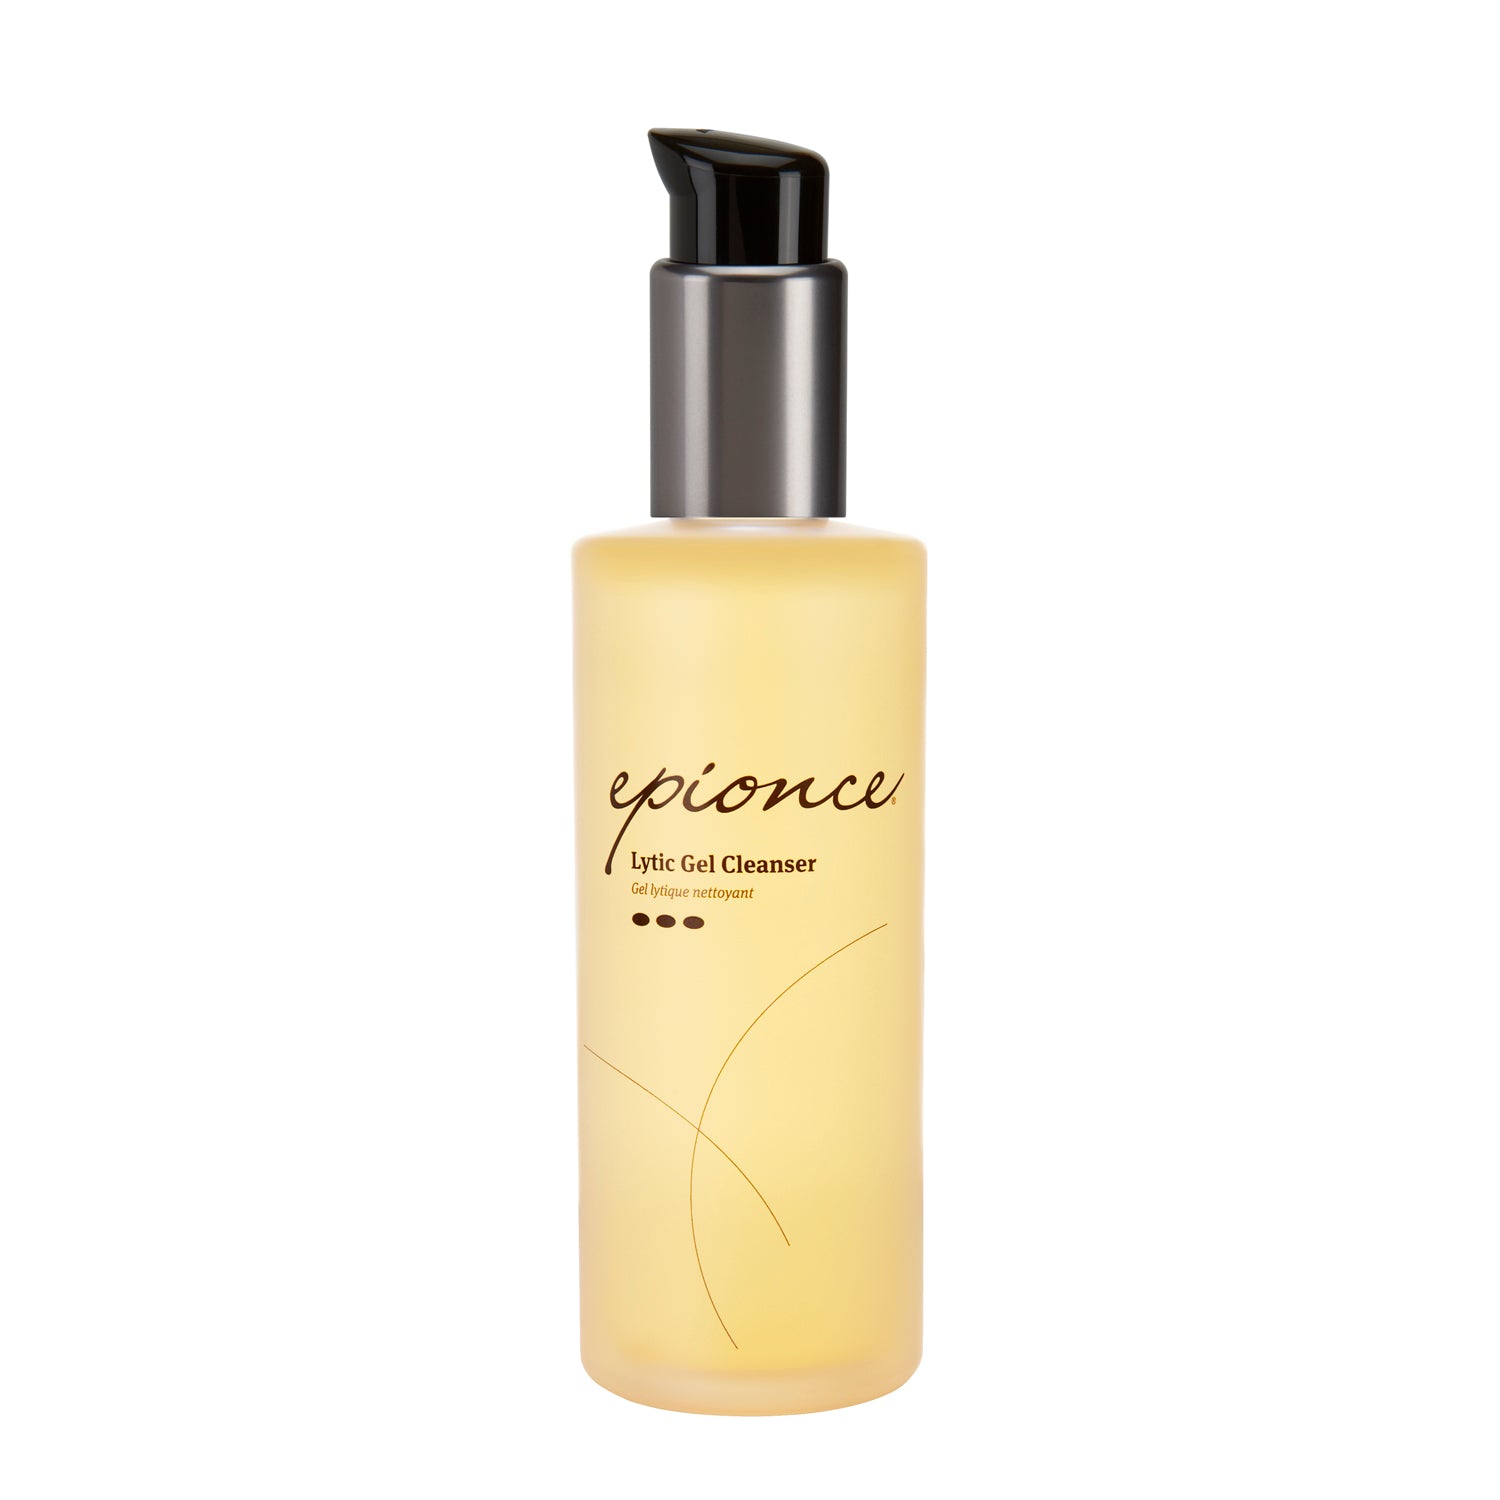 Epionce Lytic Gel Cleanser from MyExceptionalSkinCare.com Bottle Front